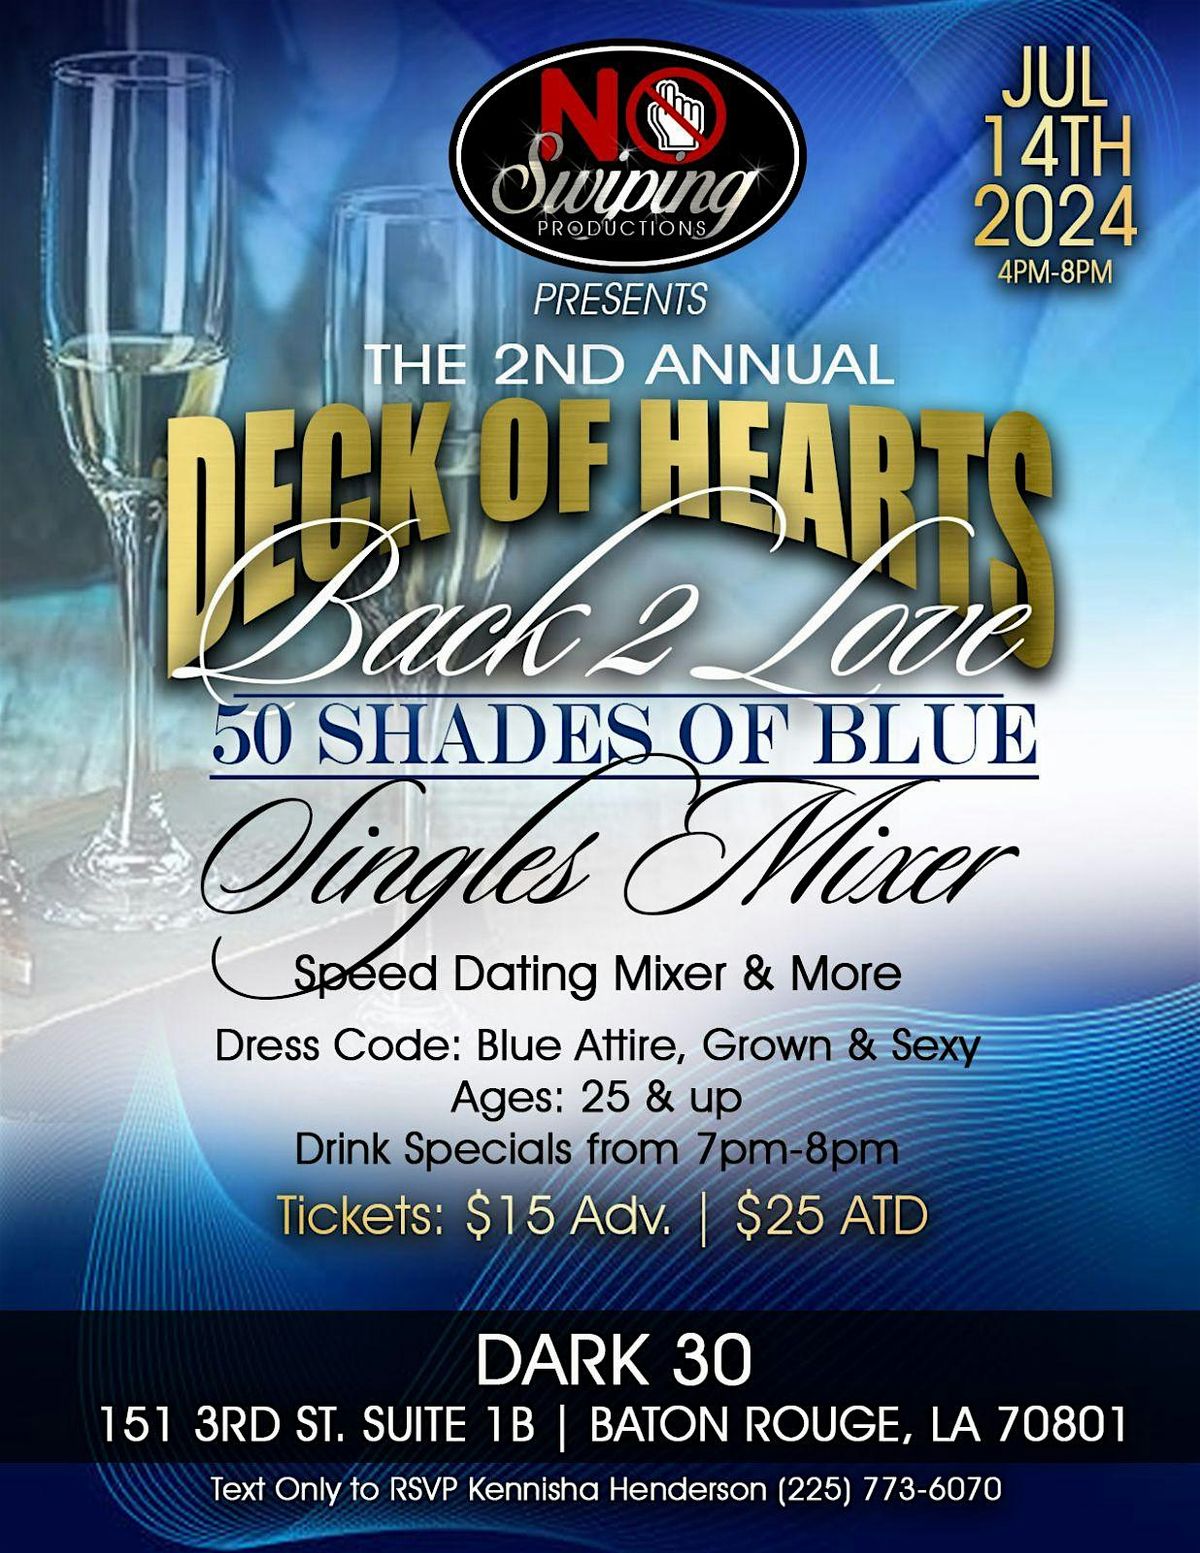 Deck of Hearts Back 2 Love Singles Mixer; 50 Shades of Blue Day Party